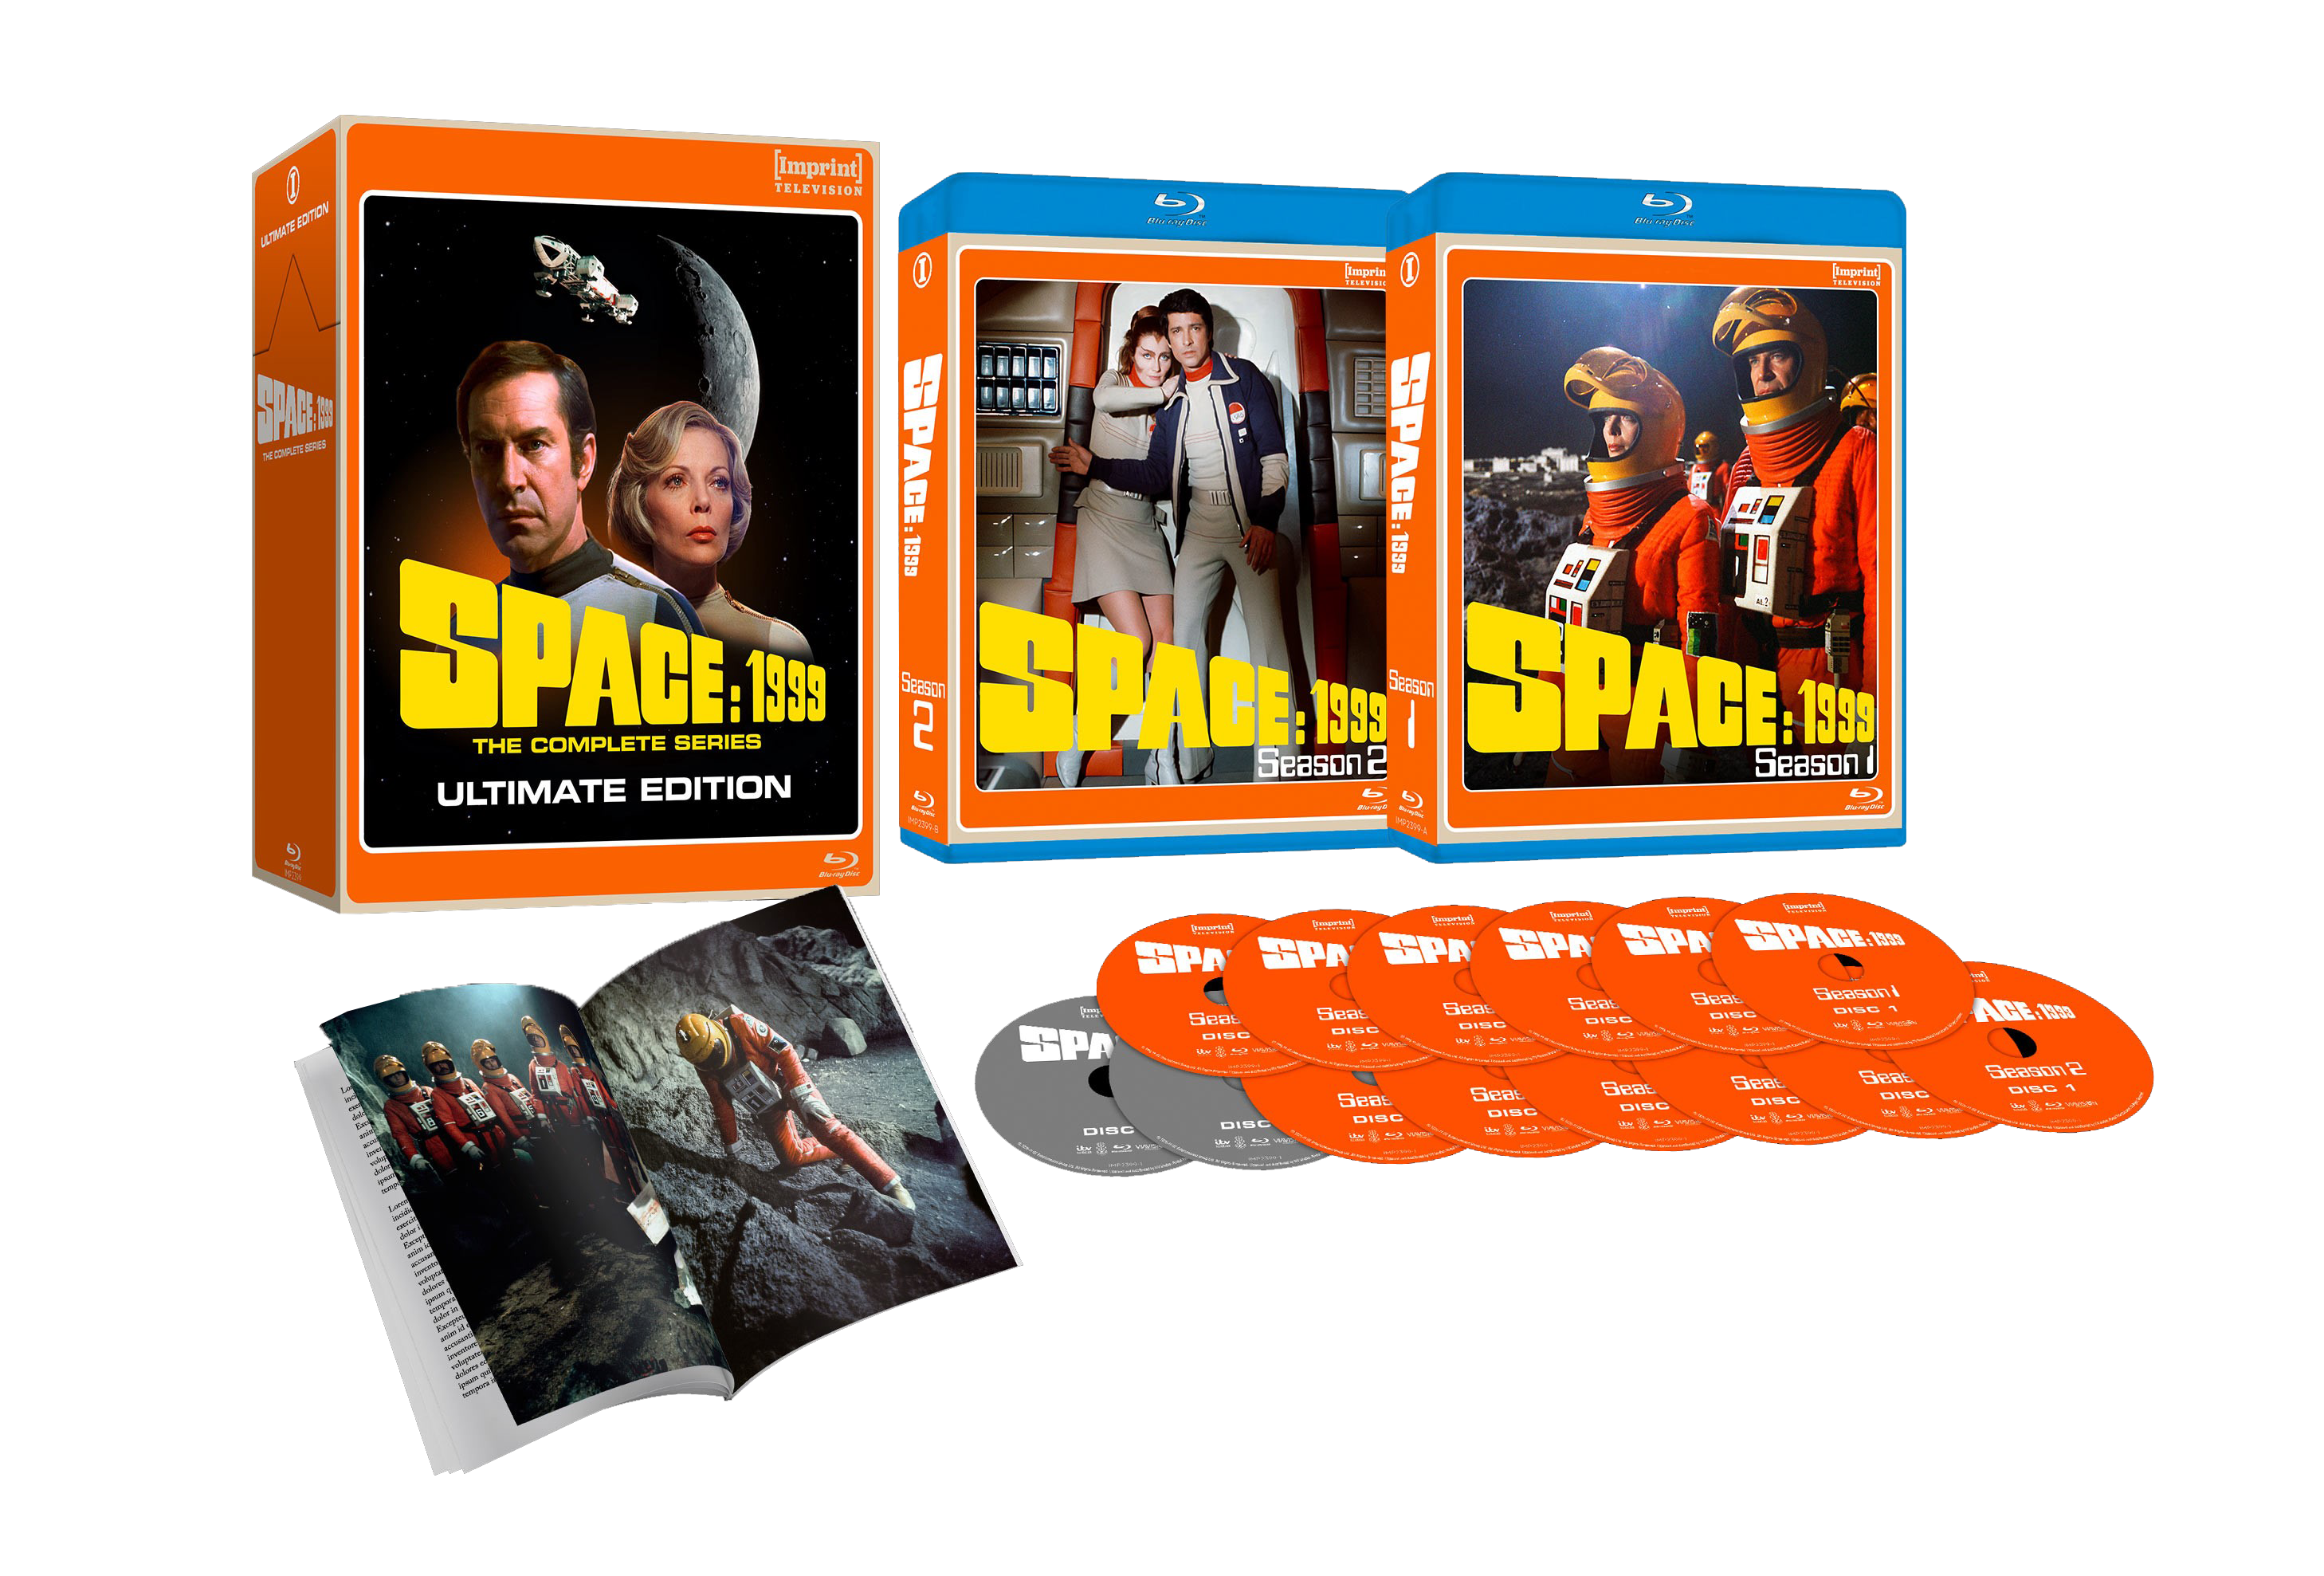 Space: 1999 - The Complete Series ULTIMATE EDITION - Imprint ...